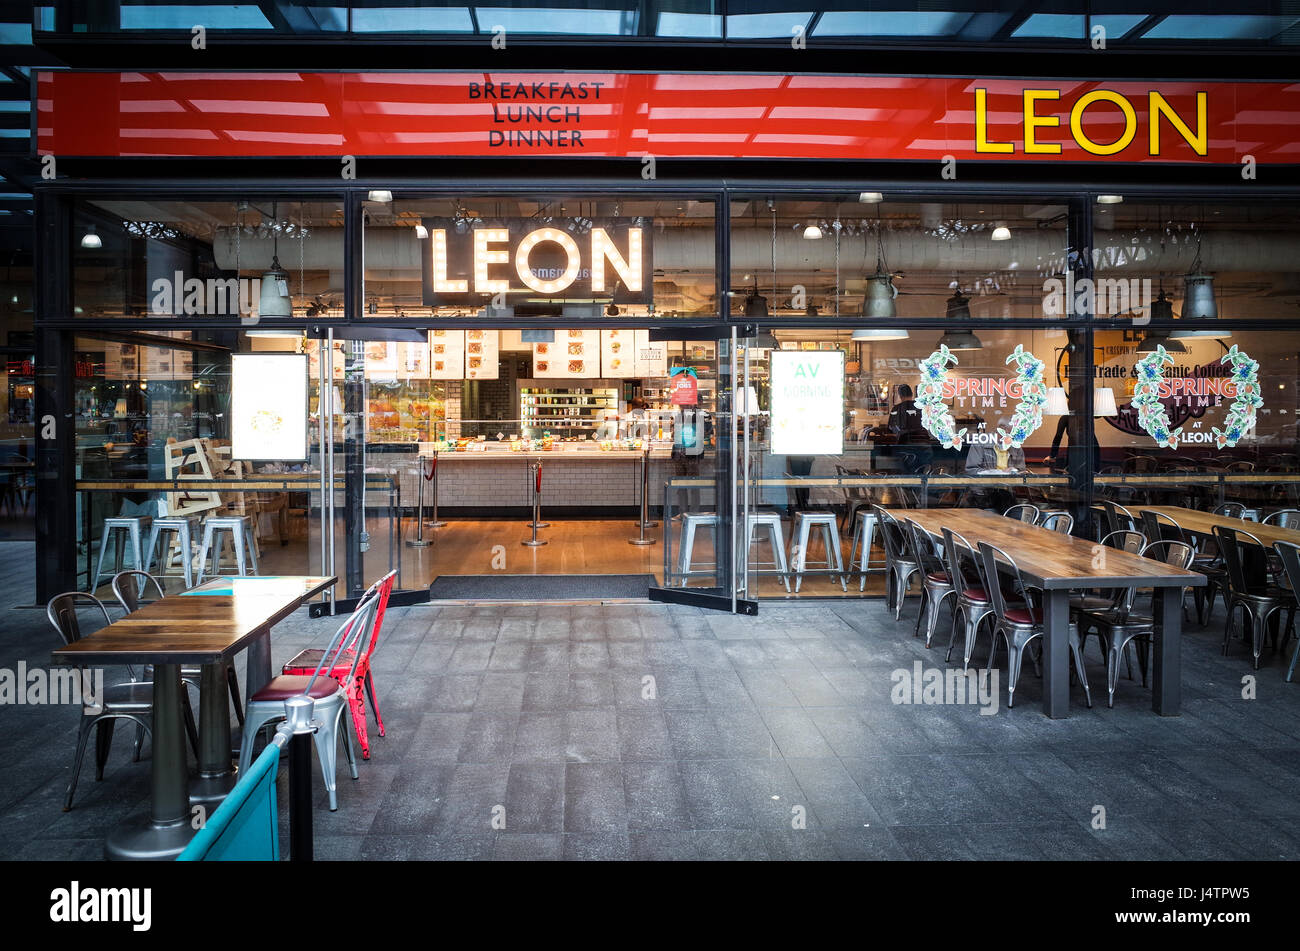 The Leon restaurant in London's redeveloped Spitalfields Market. Leon is a chain of 40+ restaurants setup in 2004 to provide natural fast food. Stock Photo